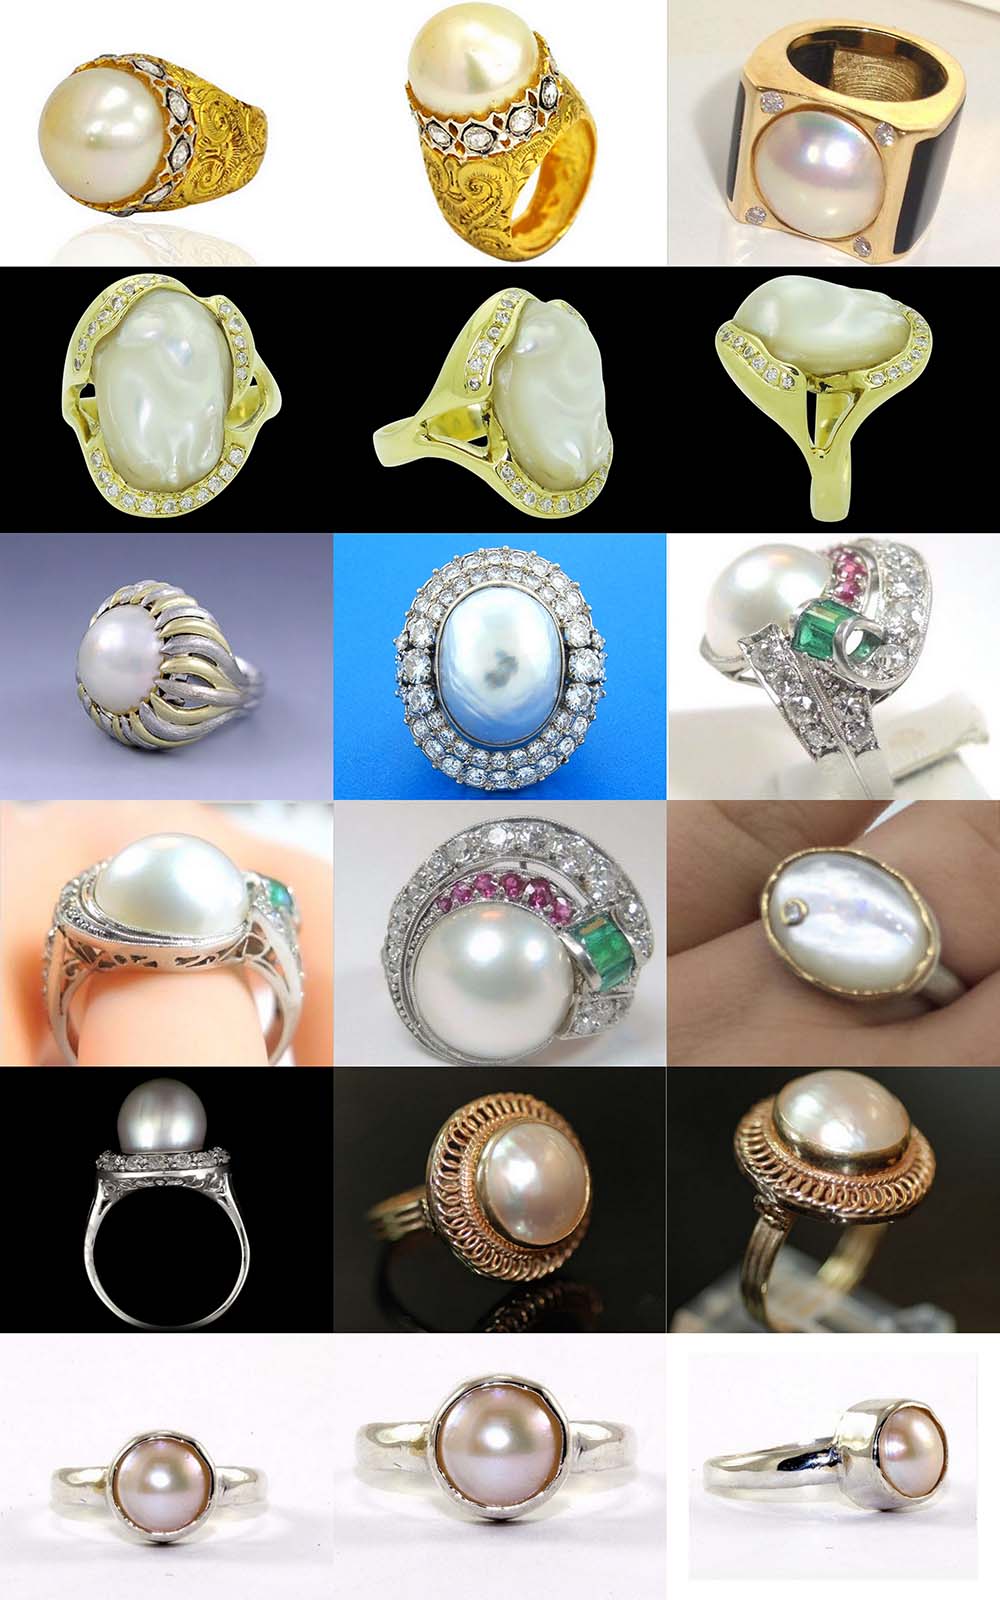 Astrogems can make ayurvedic astrological pearl rings in any style.